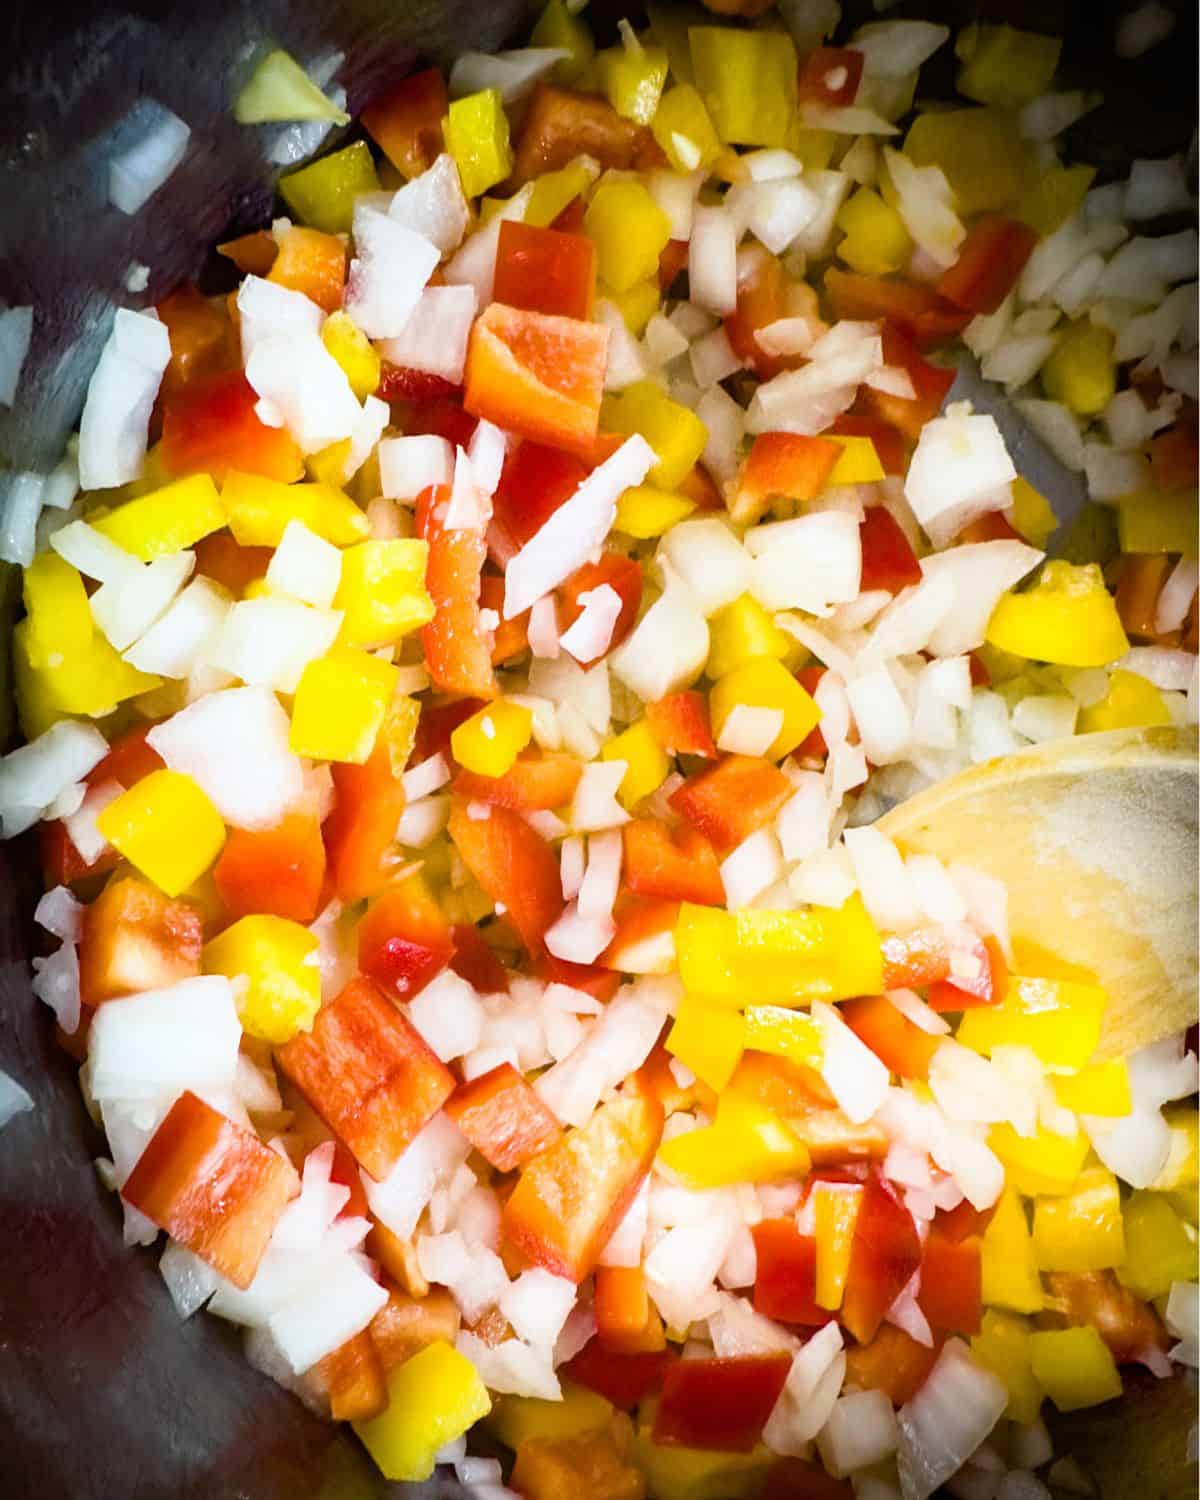 Diced onions, red and yellow bell peppers being sautéed in an Instant Pot, with steam rising, signifying the start of the cooking process.